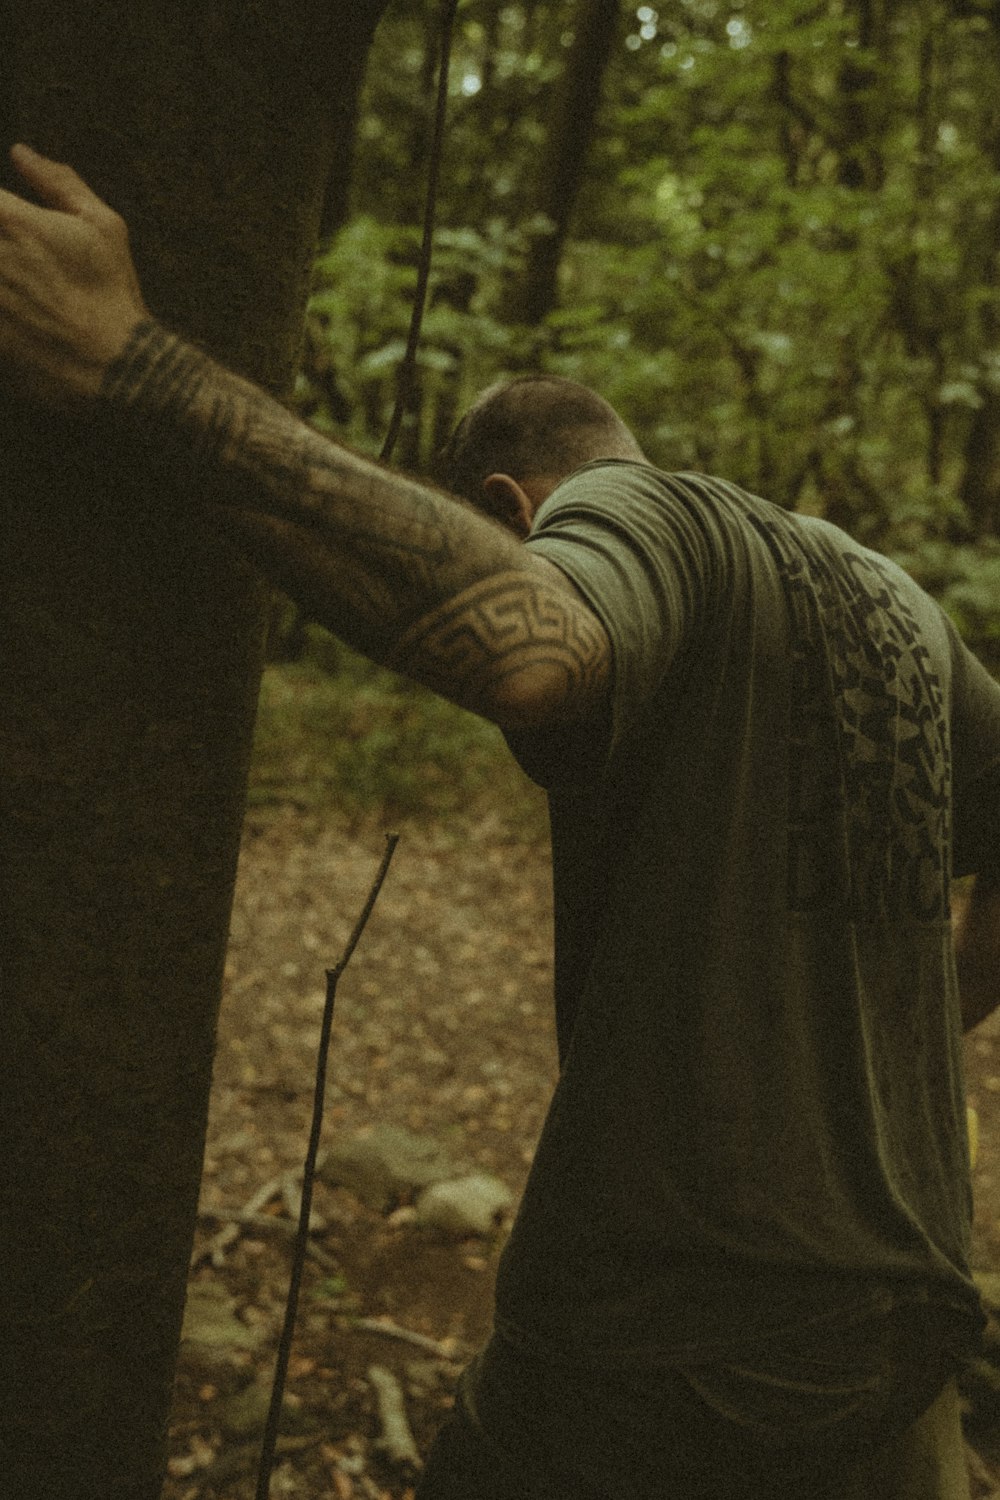 a man with a tattoo on his arm standing next to a tree